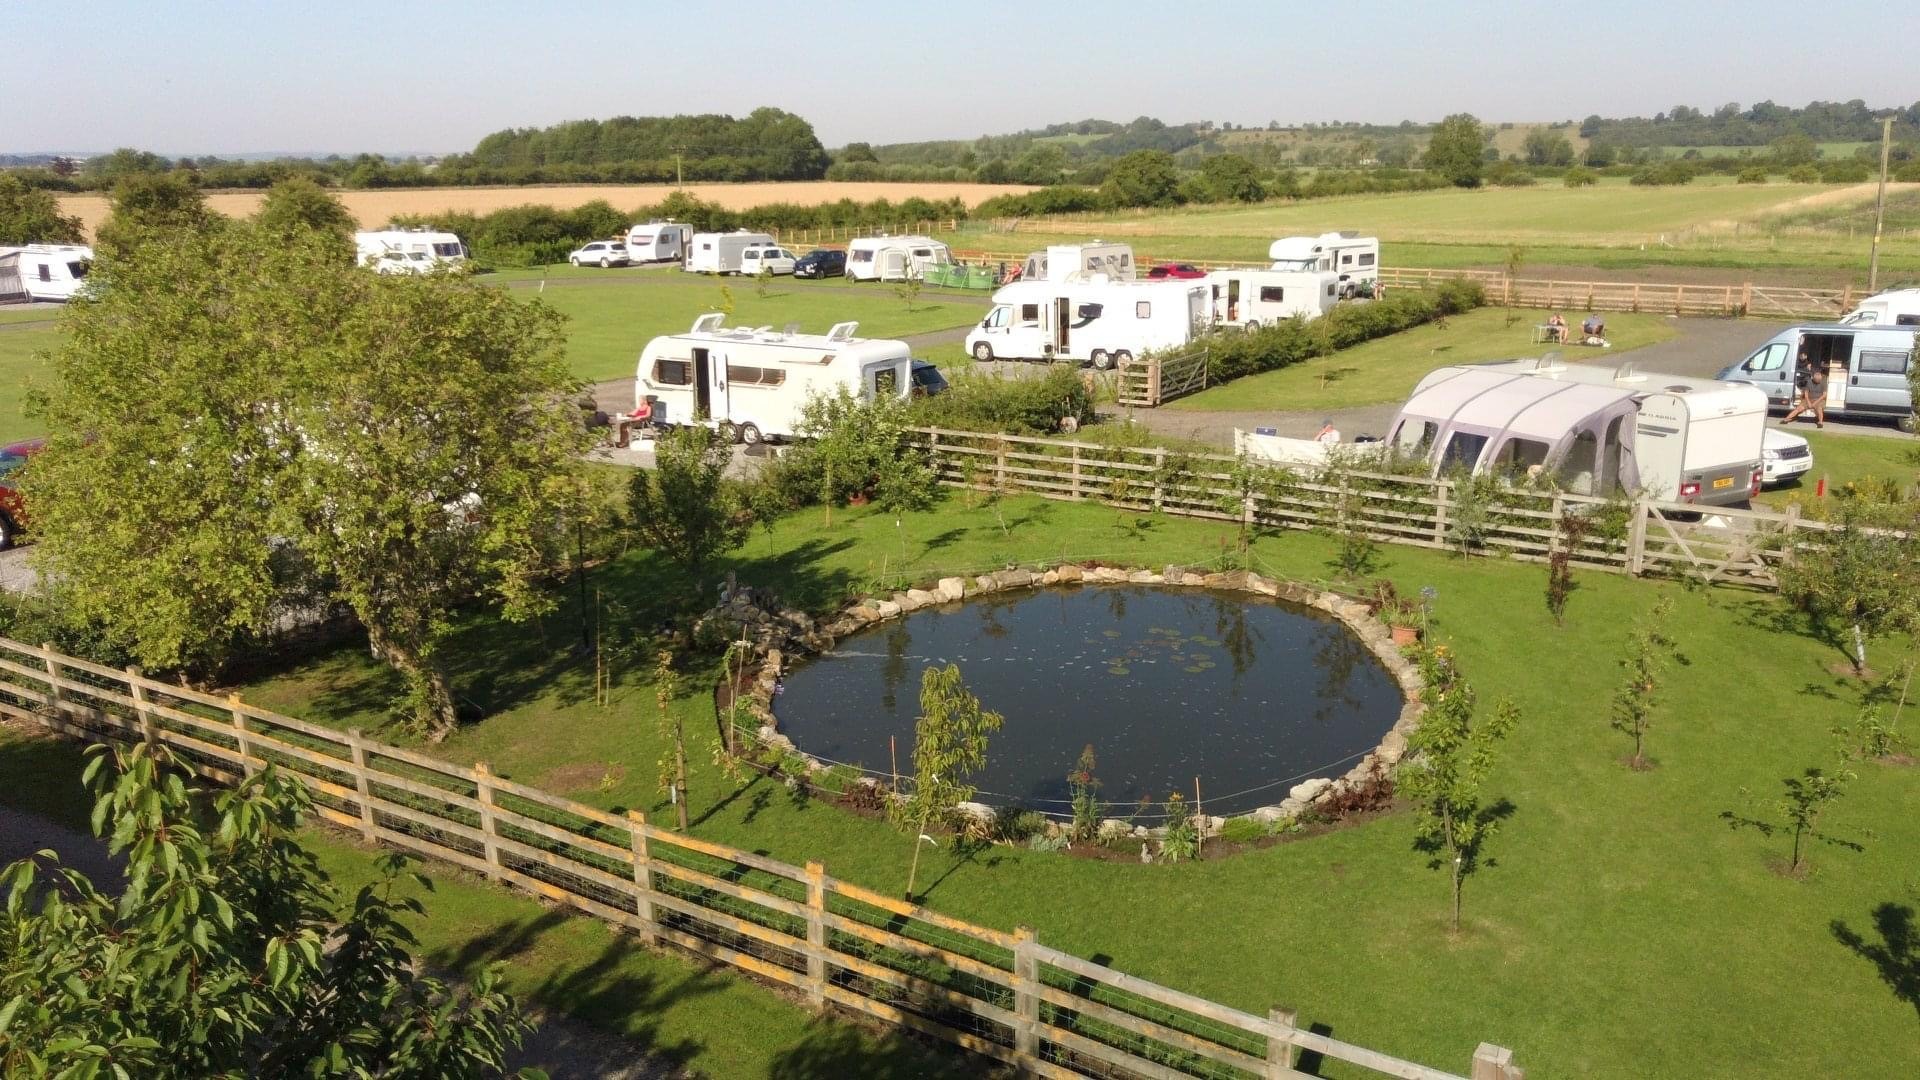 A view of the caravan park and lake with caravans and motorhomes.